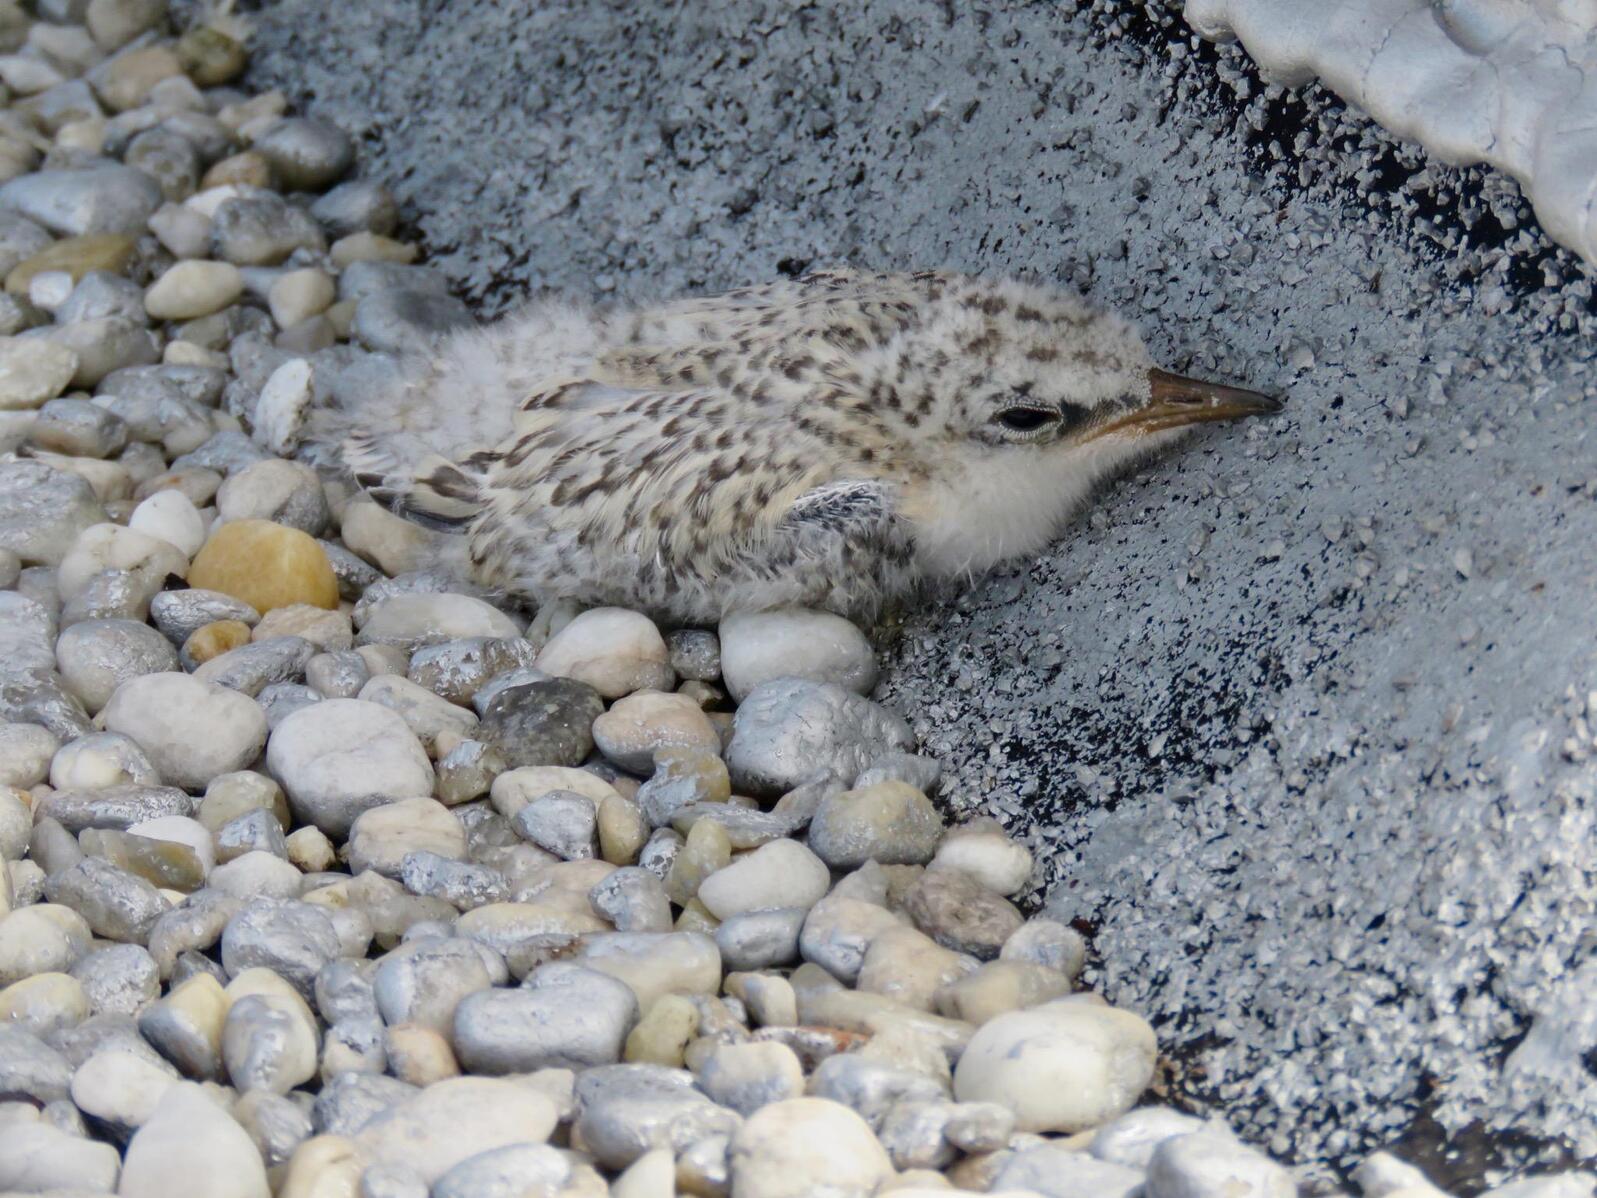 Least Tern chick on rooftop.